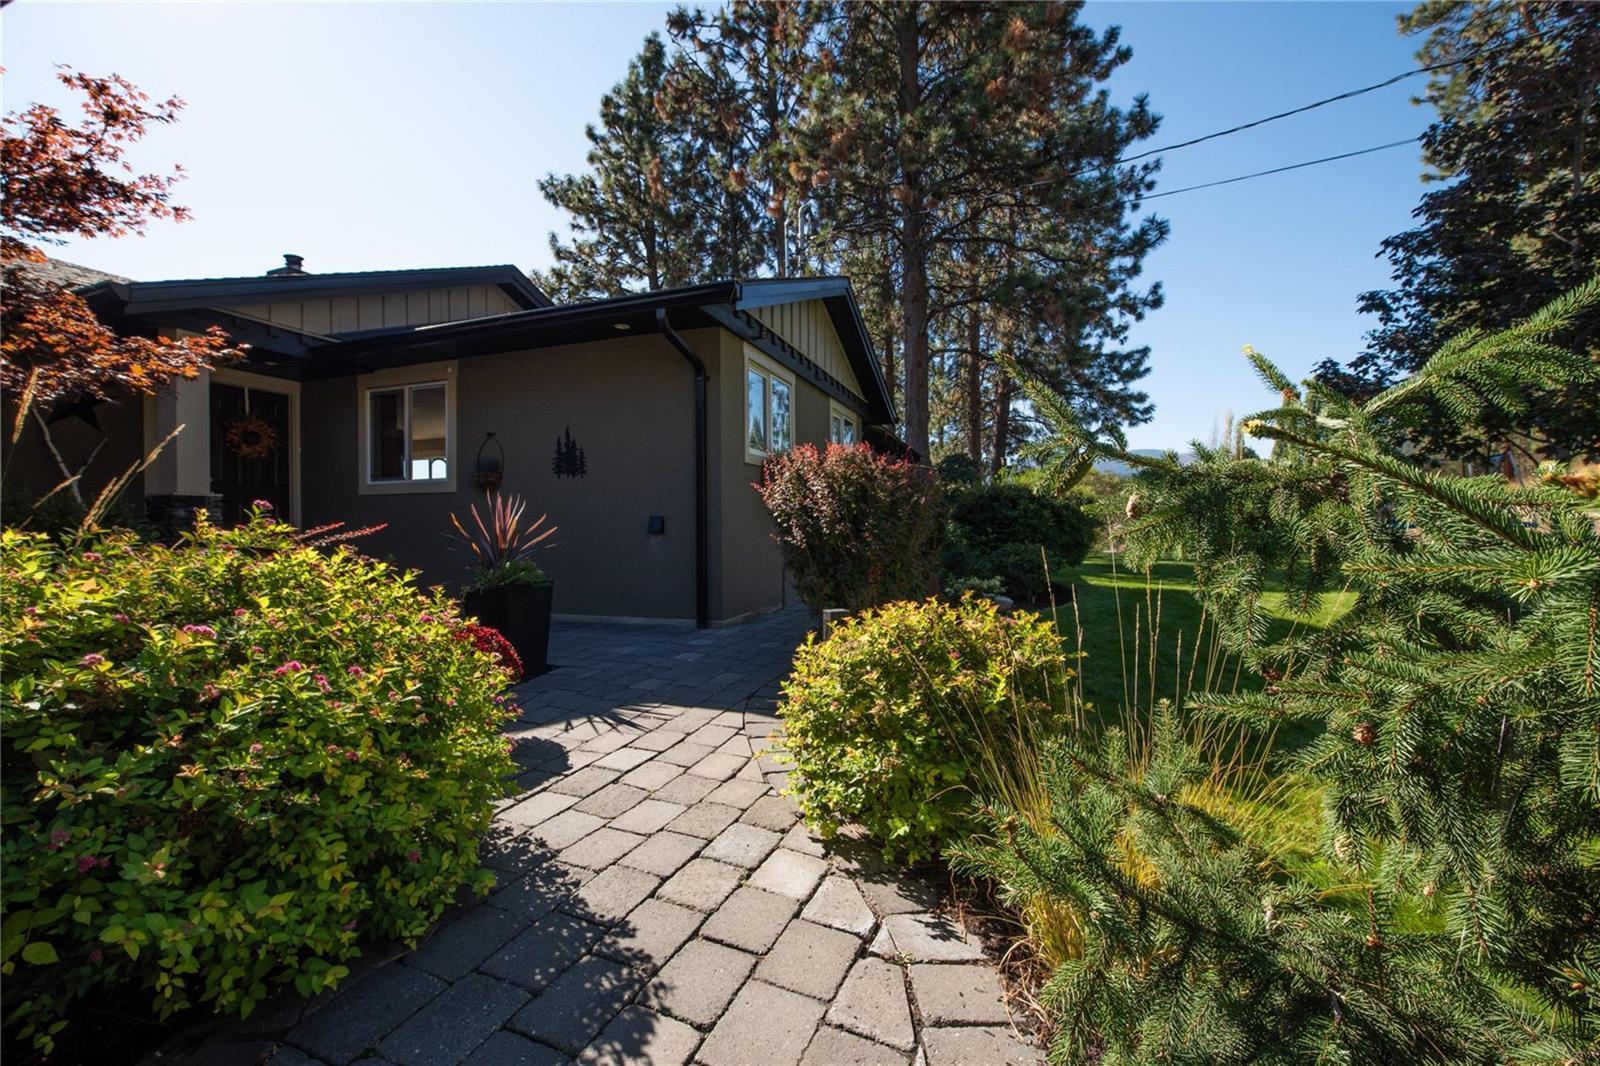      5824 Brown Place  , Peachland, Central Okanagan,  ;  Listing Number: MLS 10262803